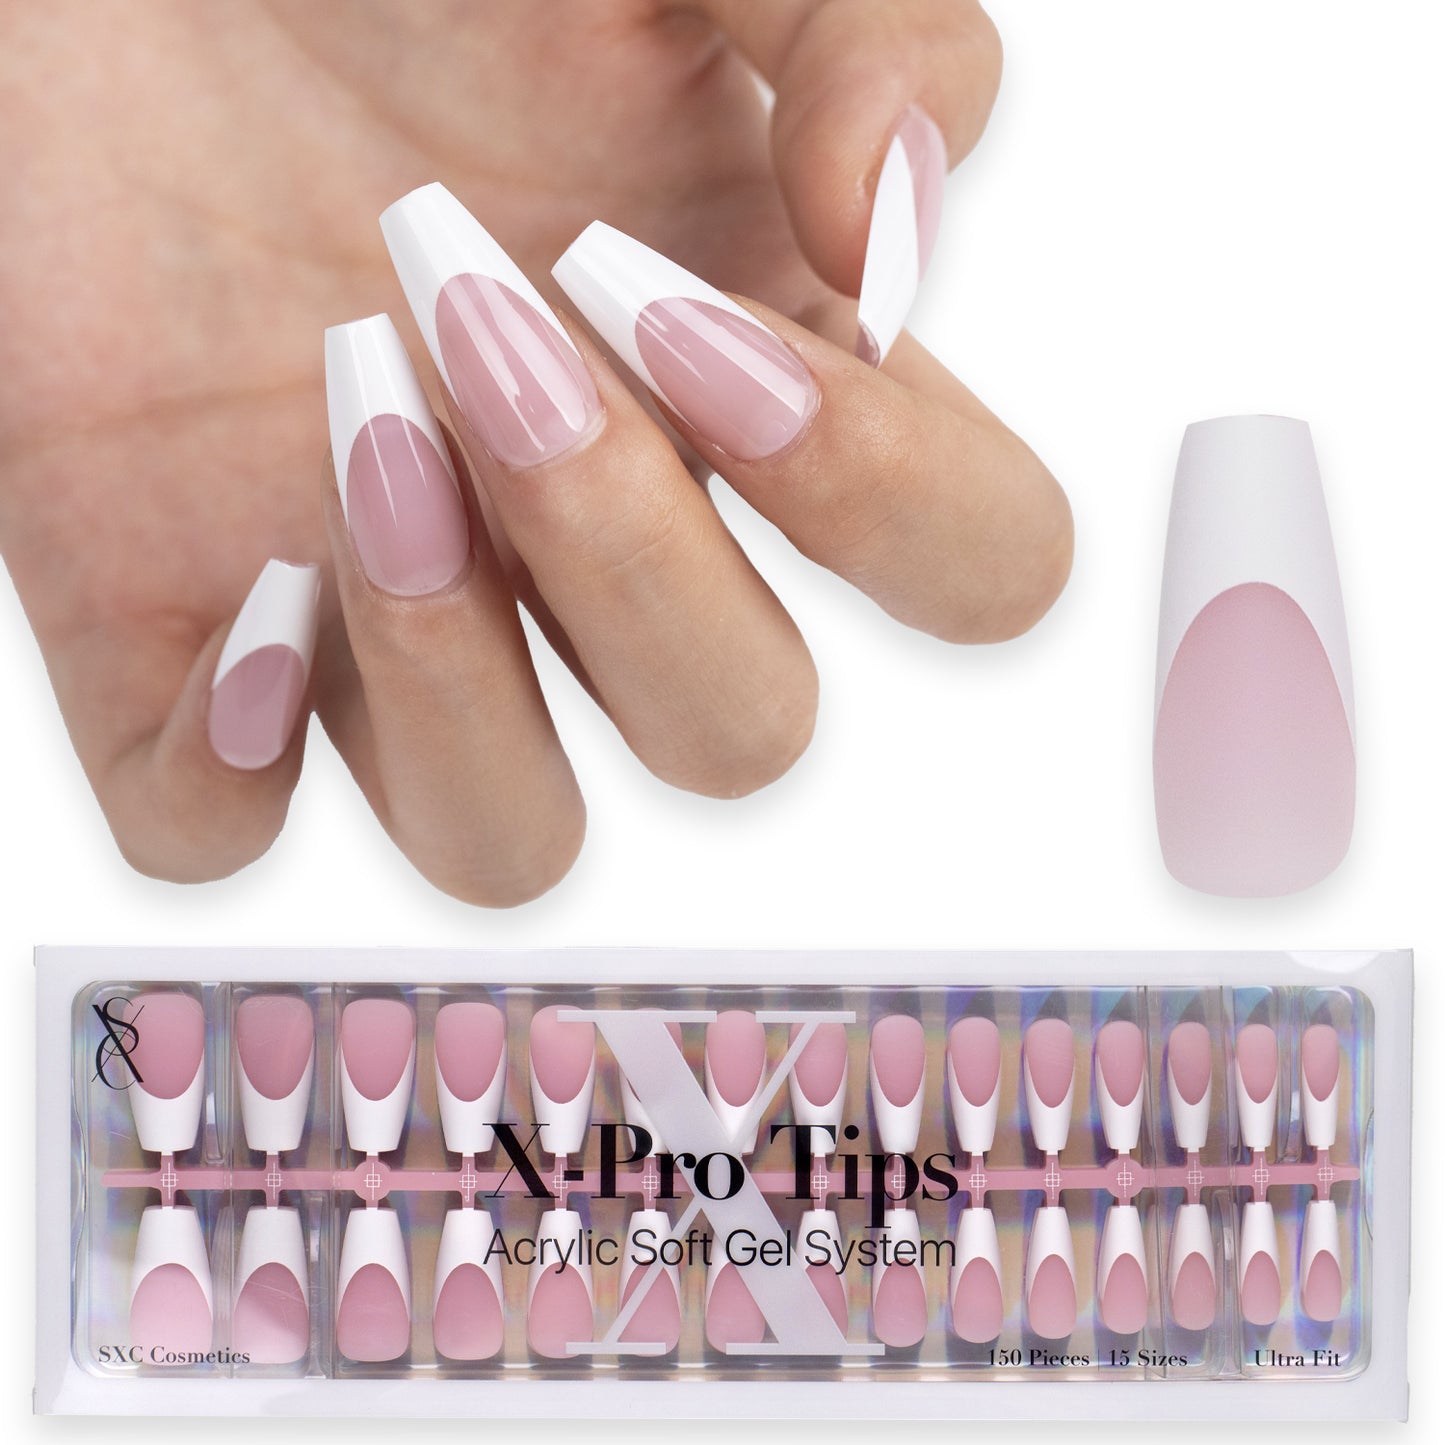 SXC Cosmetics X-Pro Tips Press on Nails, Pink Medium Coffin French Tips, 150 Pieces in 15 Sizes Ultra Fit Acrylic Soft Gel System